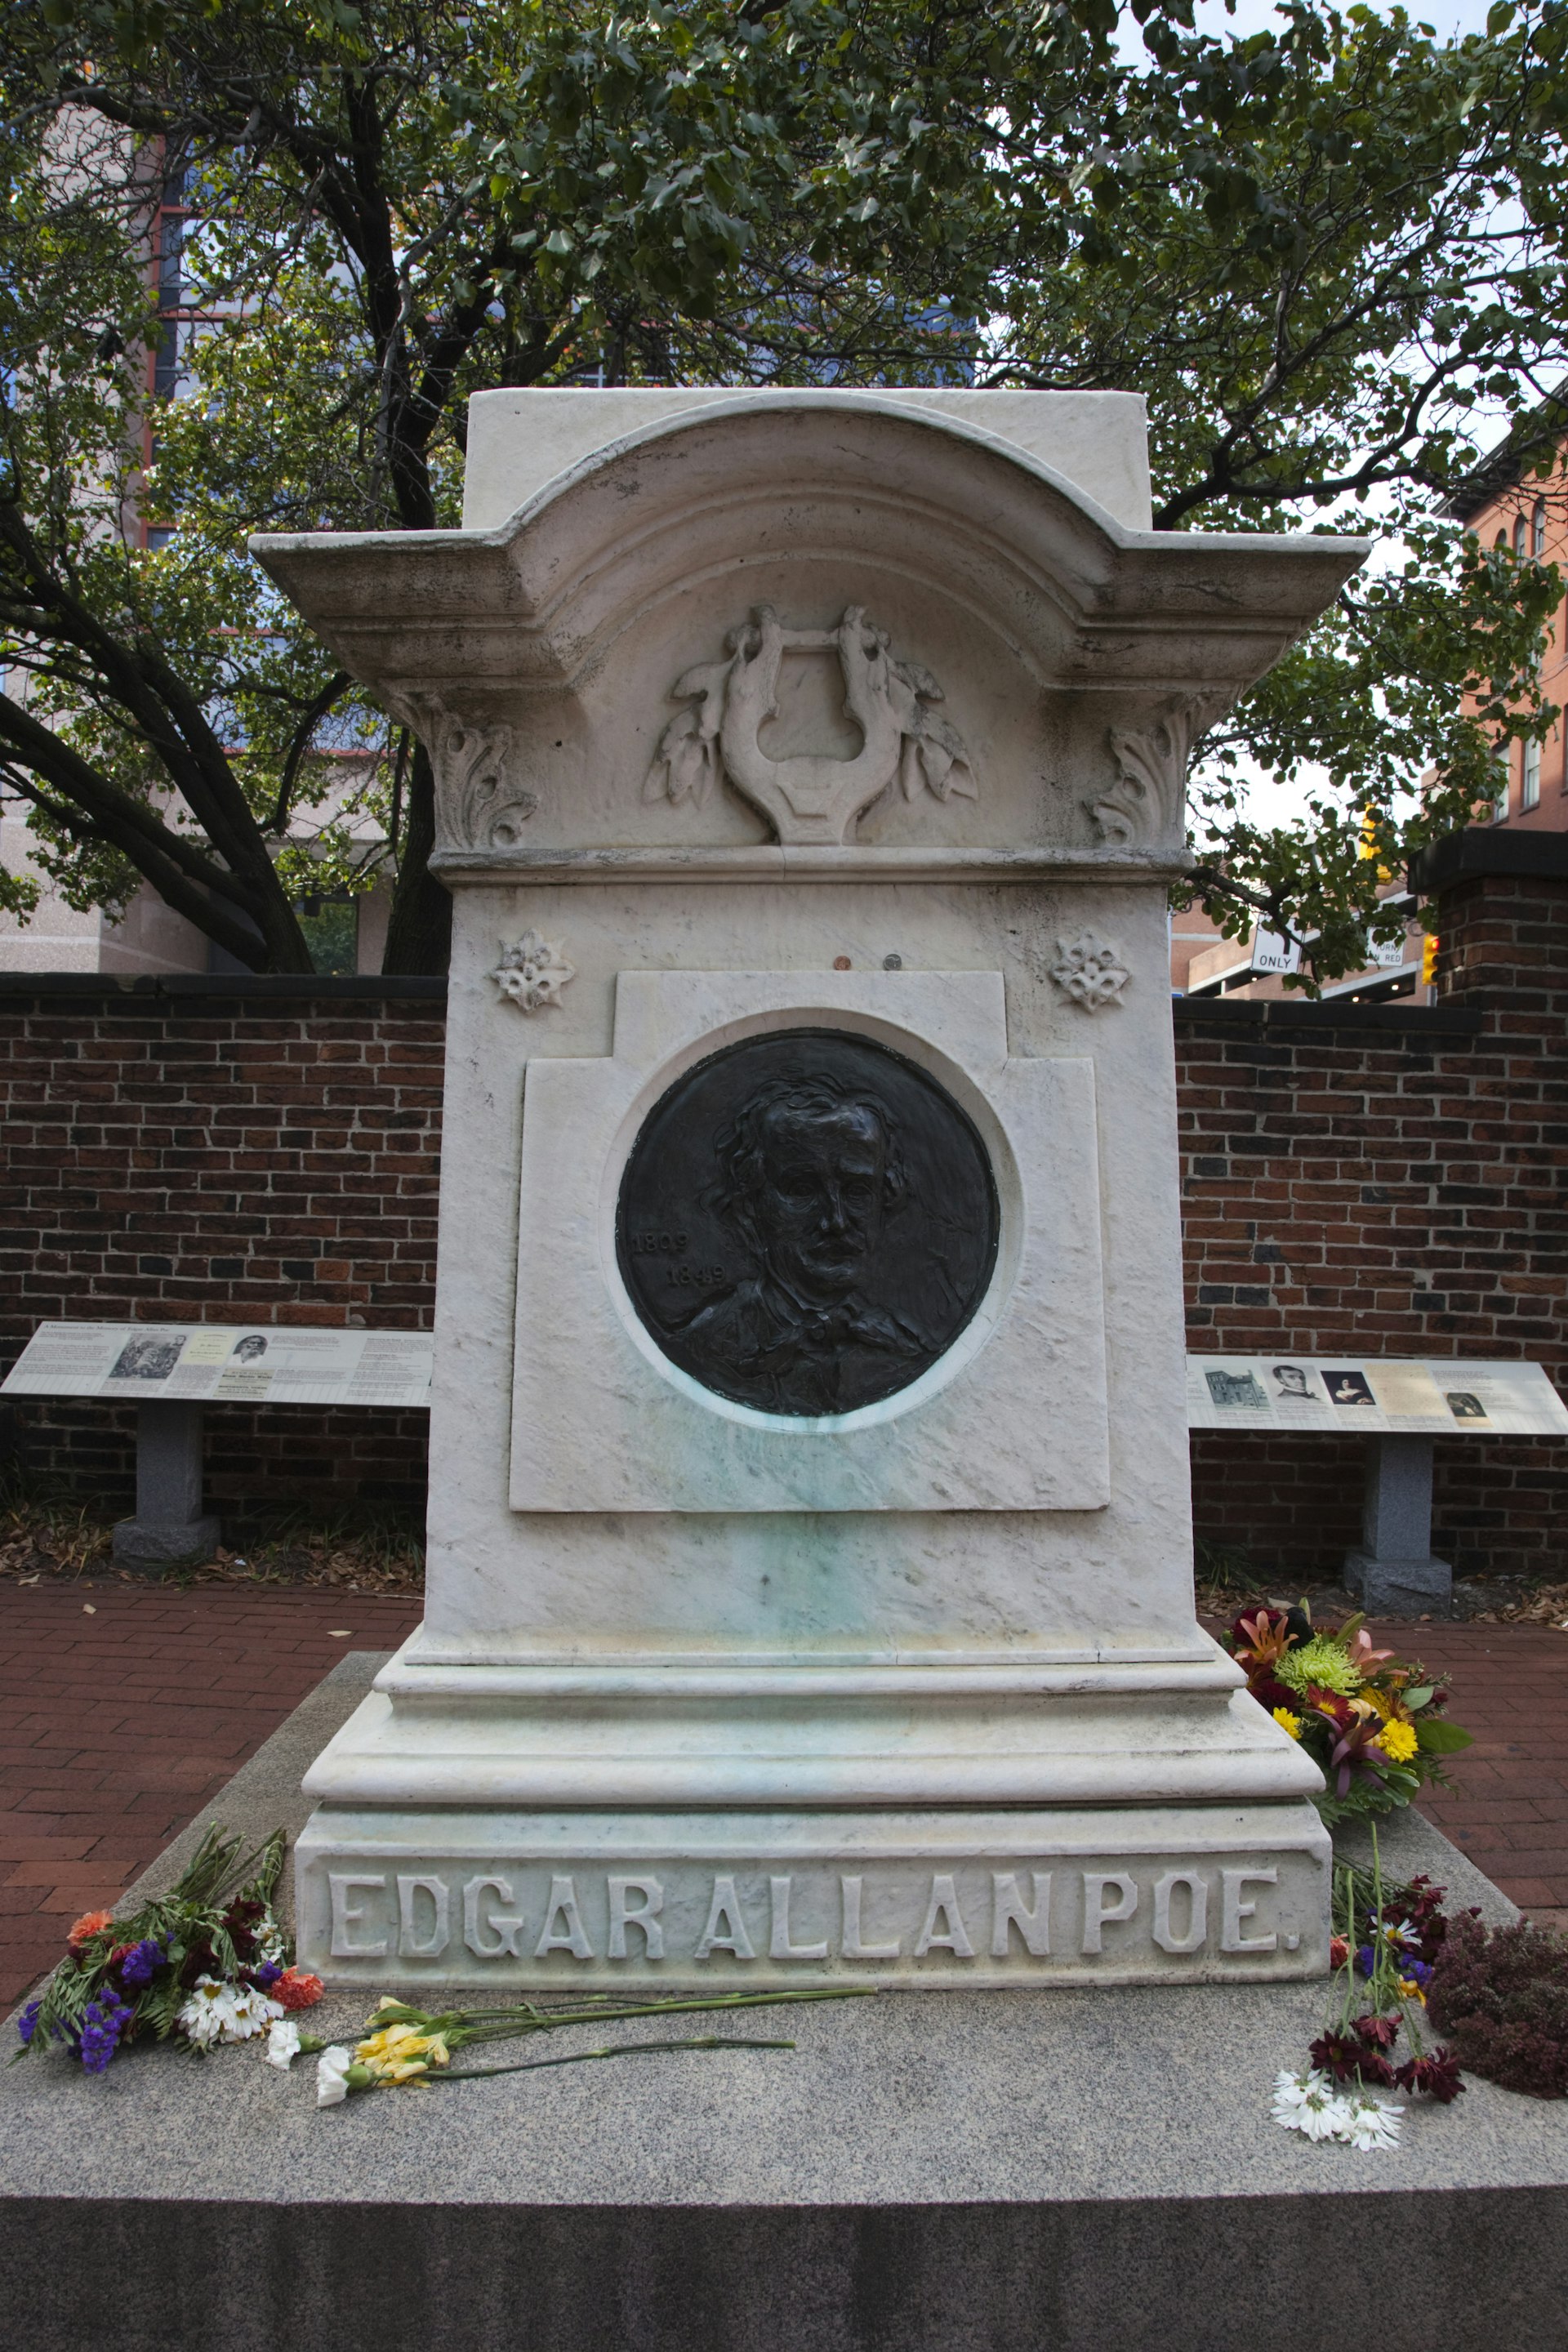 Shot of the grave of Edgar Allan Poe in Baltimore, Maryland, USA